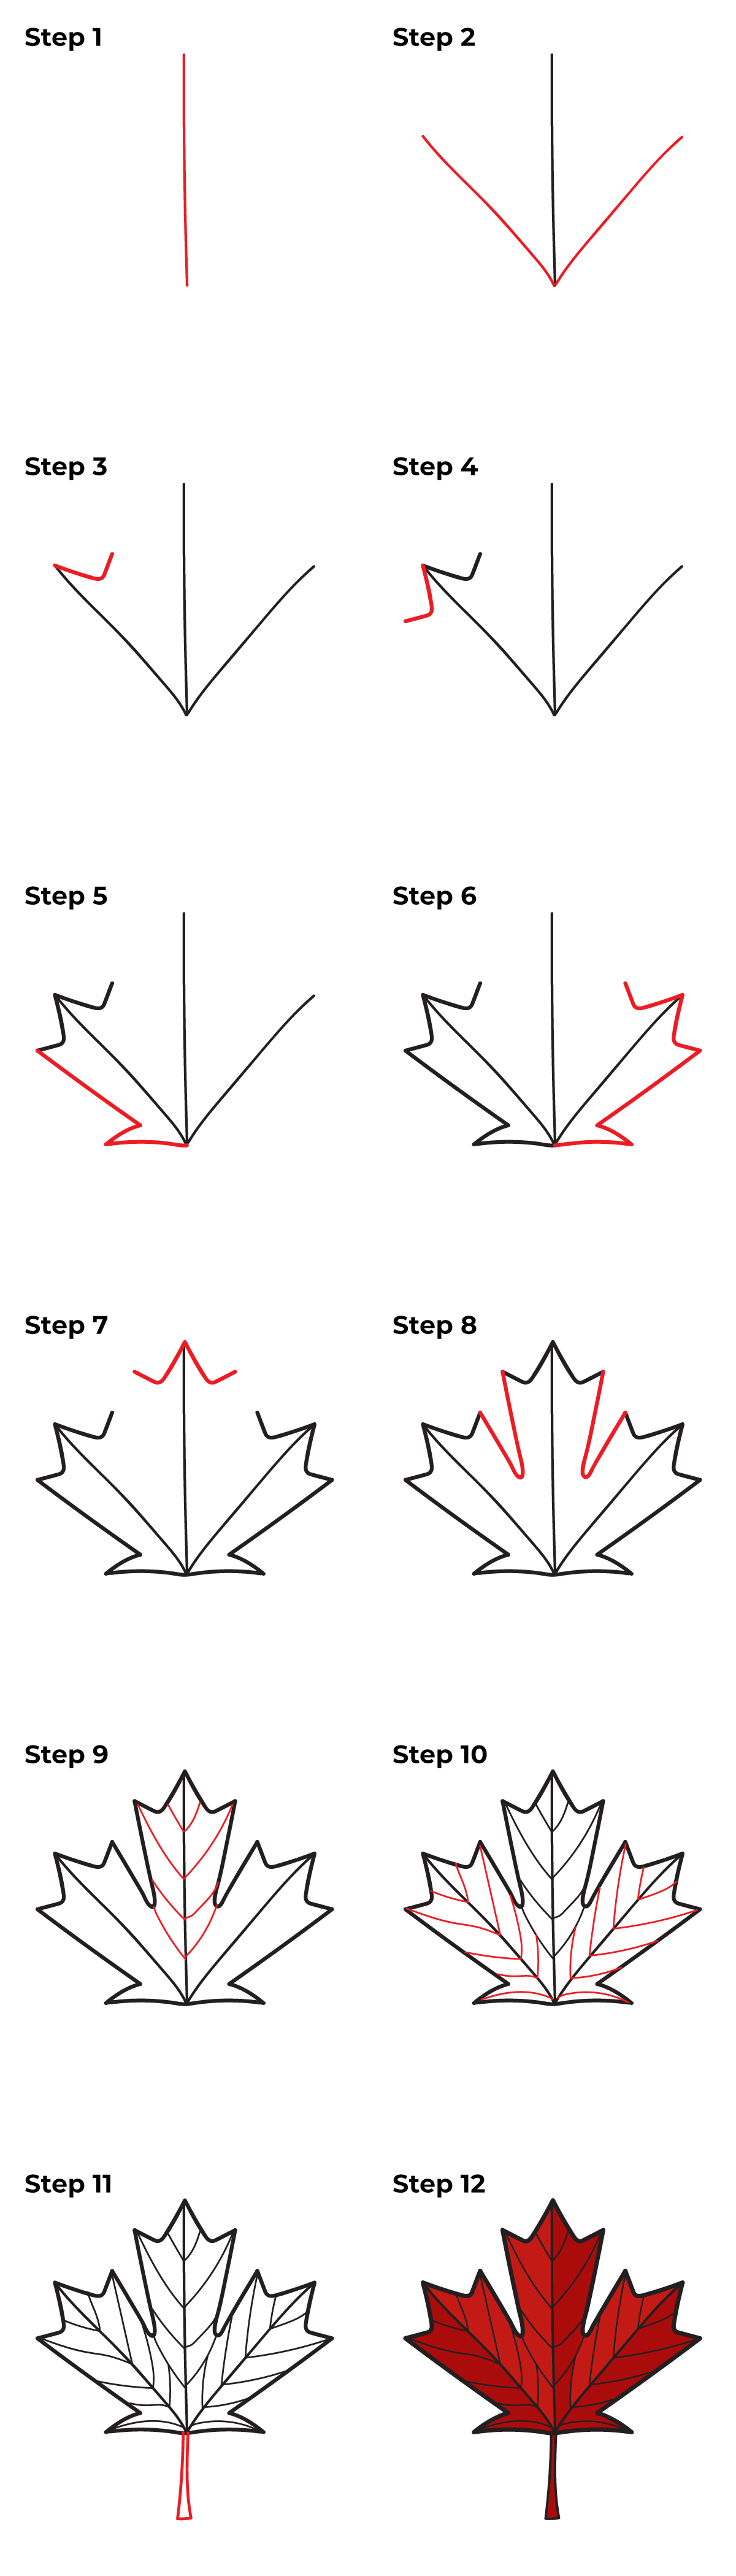 How To Draw Toronto Maple Leafs Jersey - Step By Step Drawing 